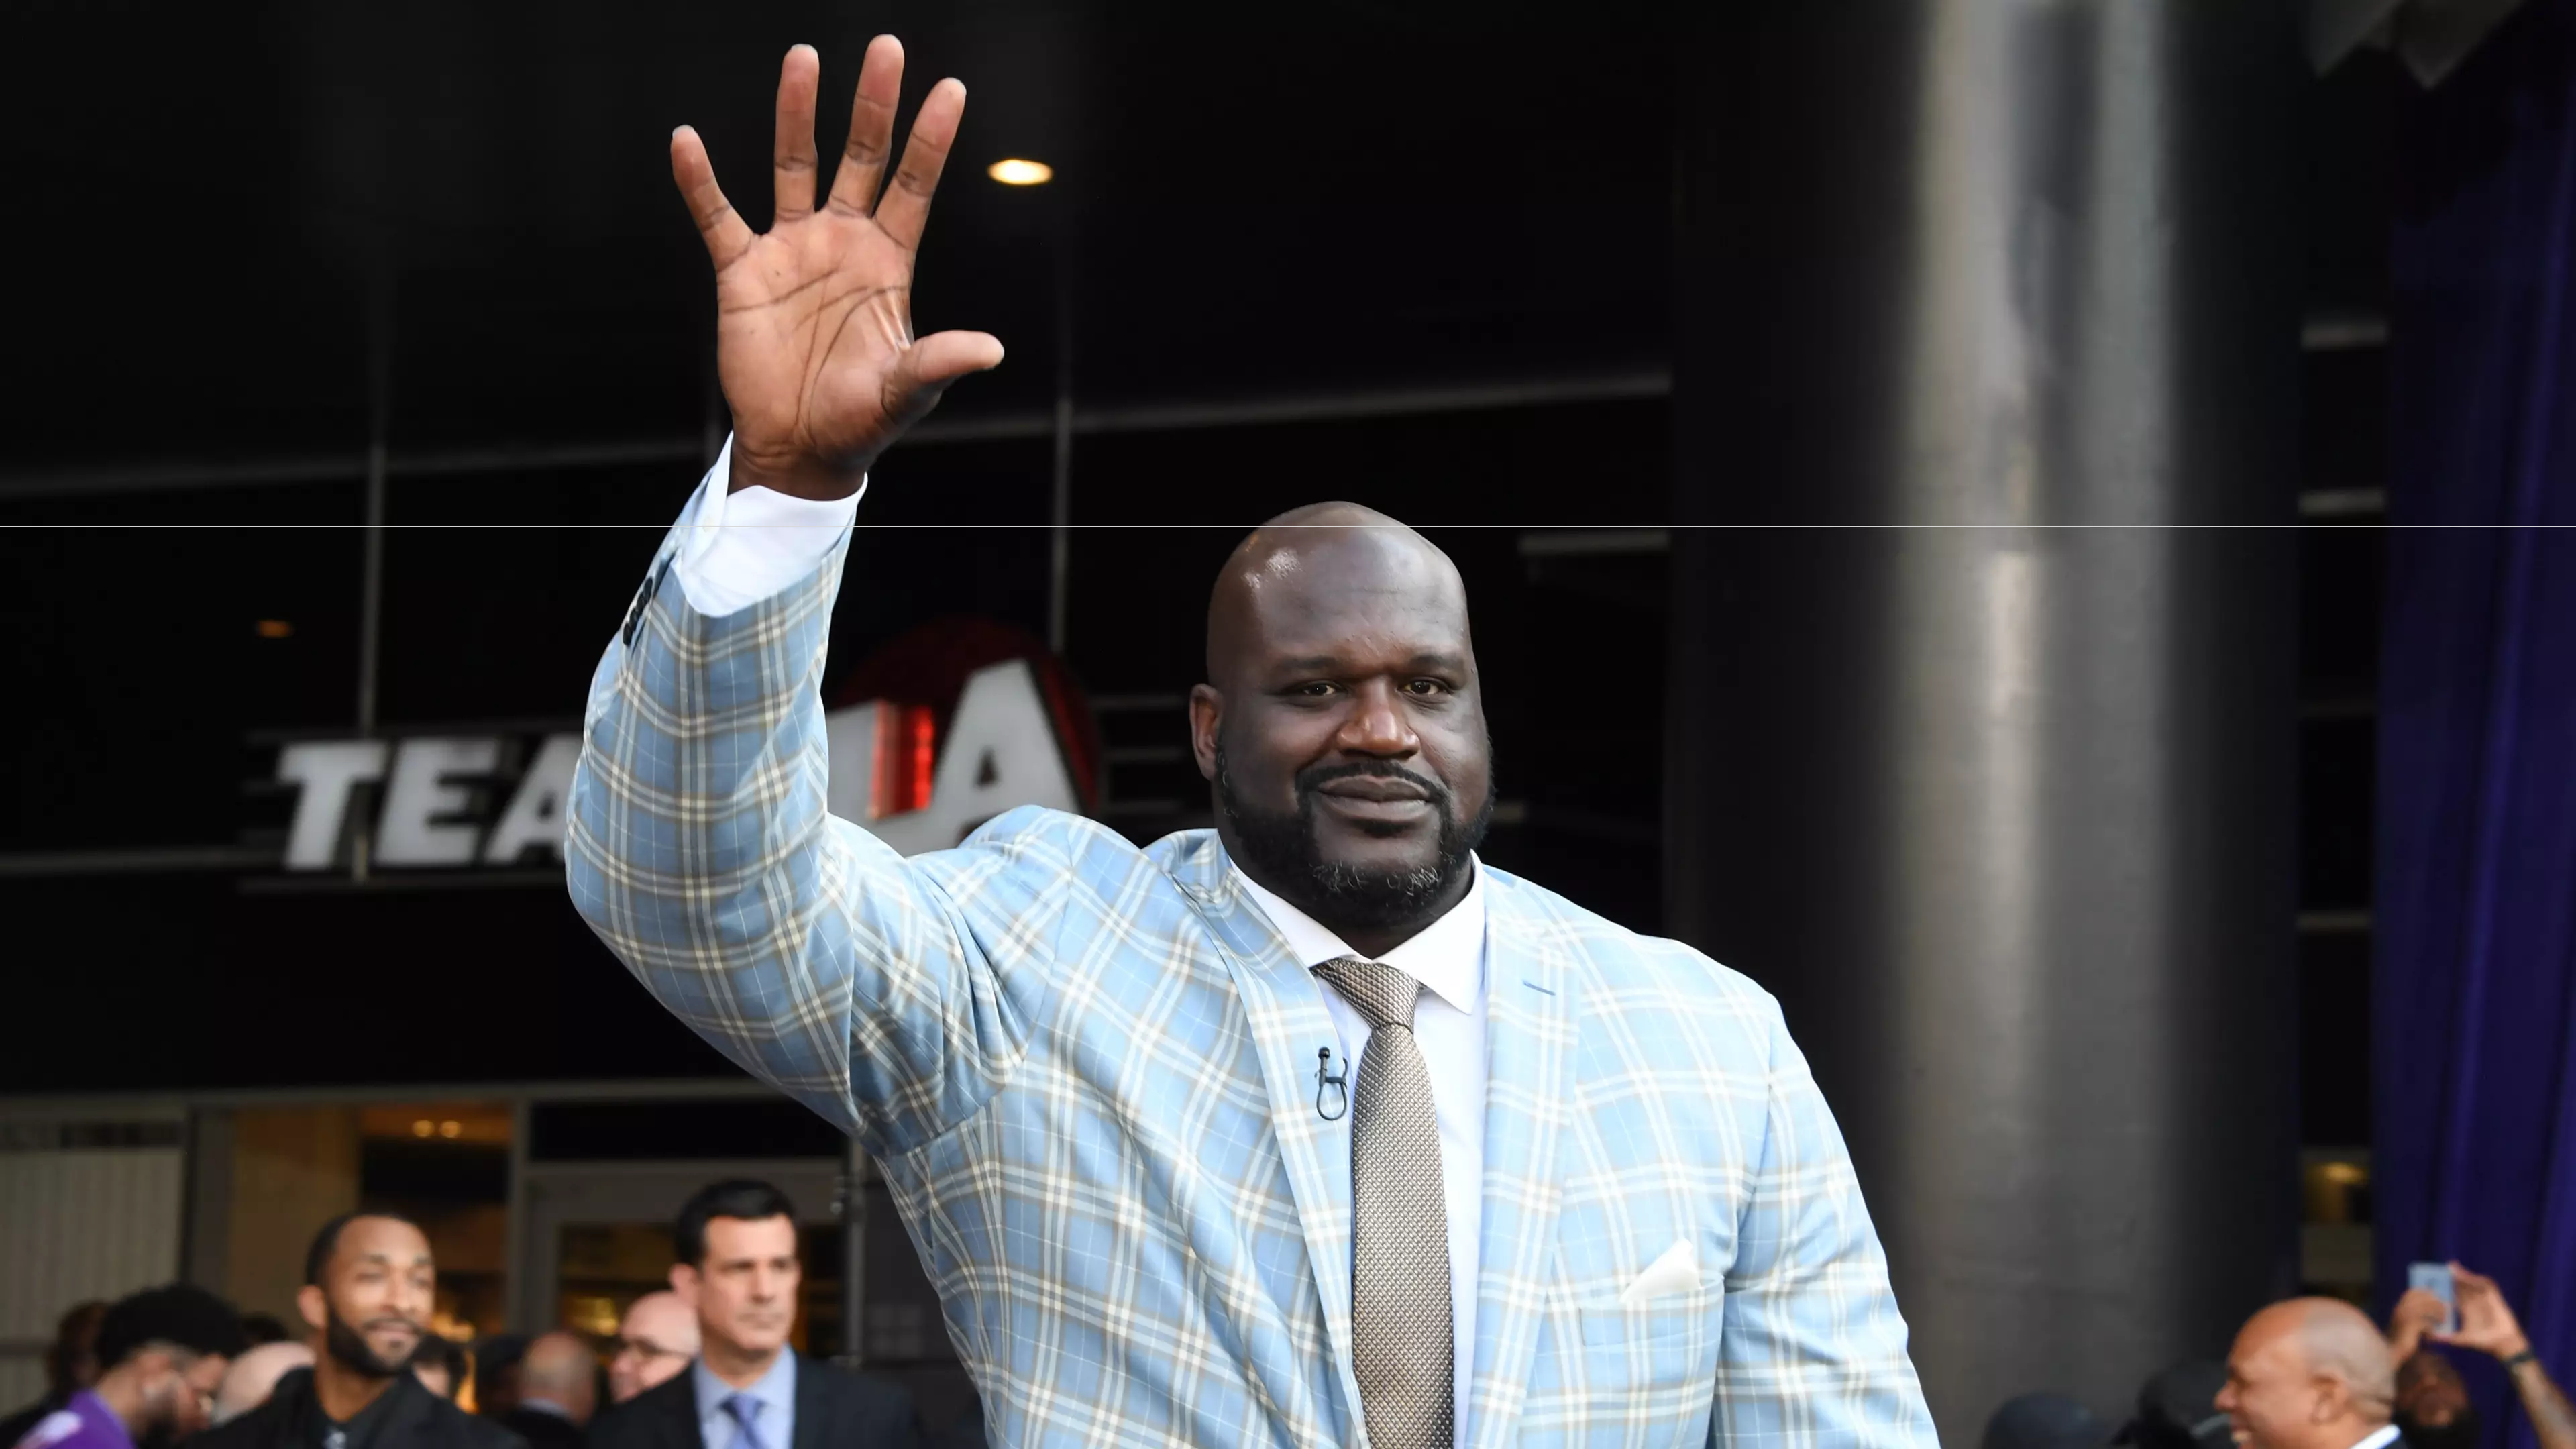 Shaquille O'Neal To Pay For Funeral Of Teenager Who Shot Himself